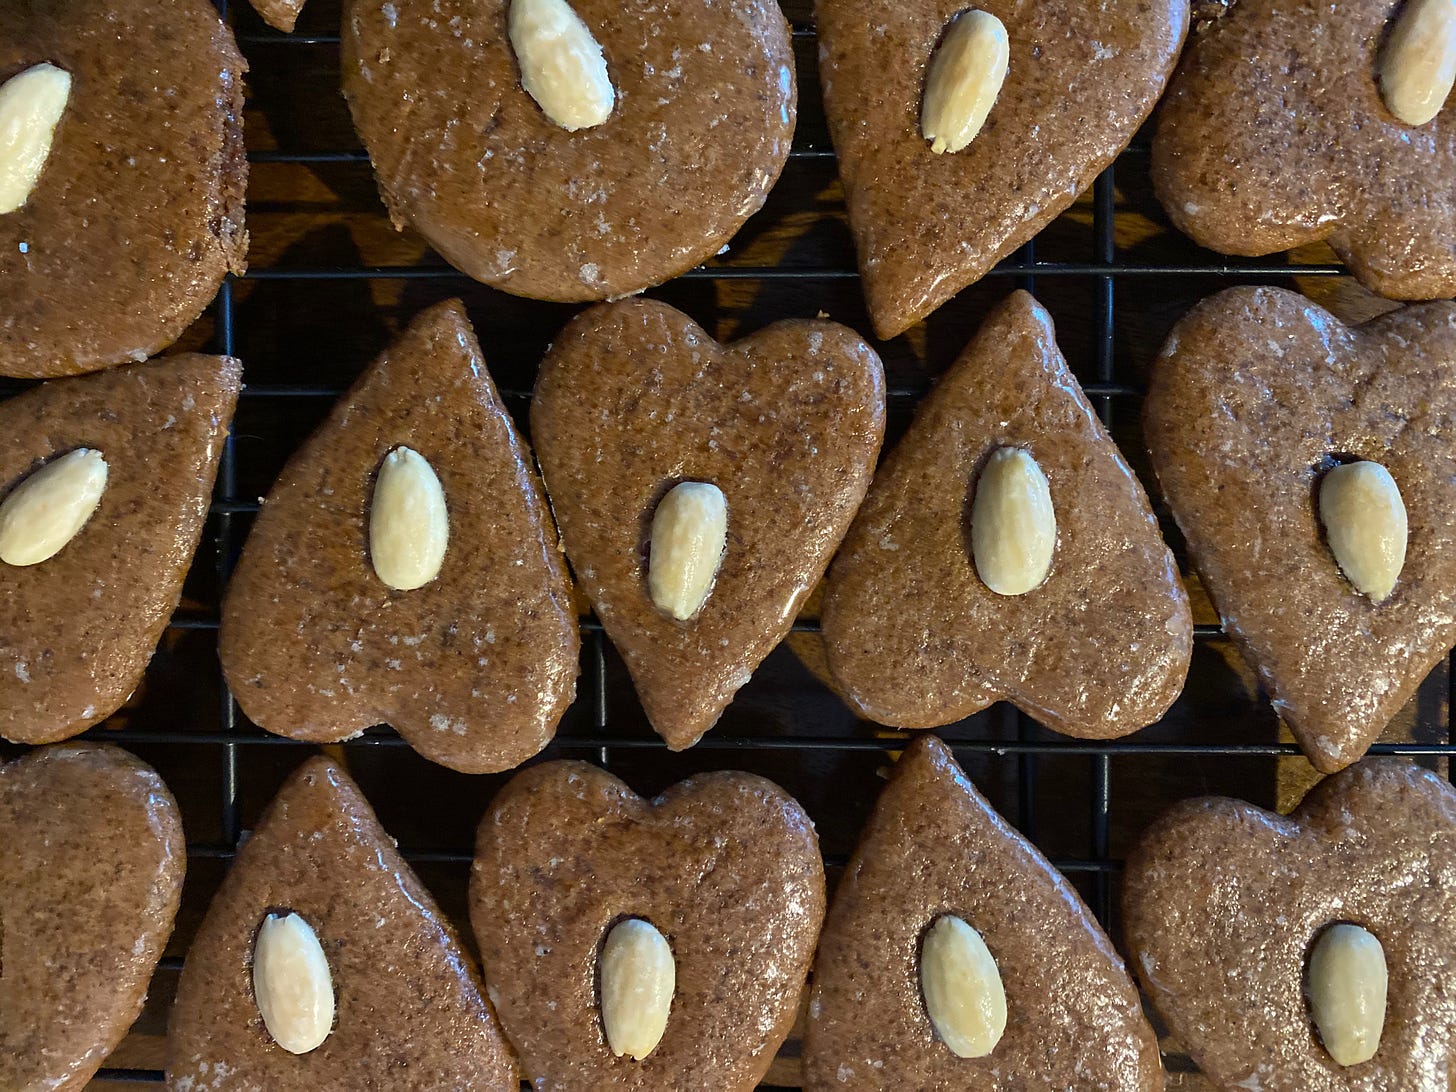 A closeup of many heart-shaped gingerbread cookies on a wire cooling rack. The cookies are covered with a shiny glaze and each one has a blanched almond pressed into its center.